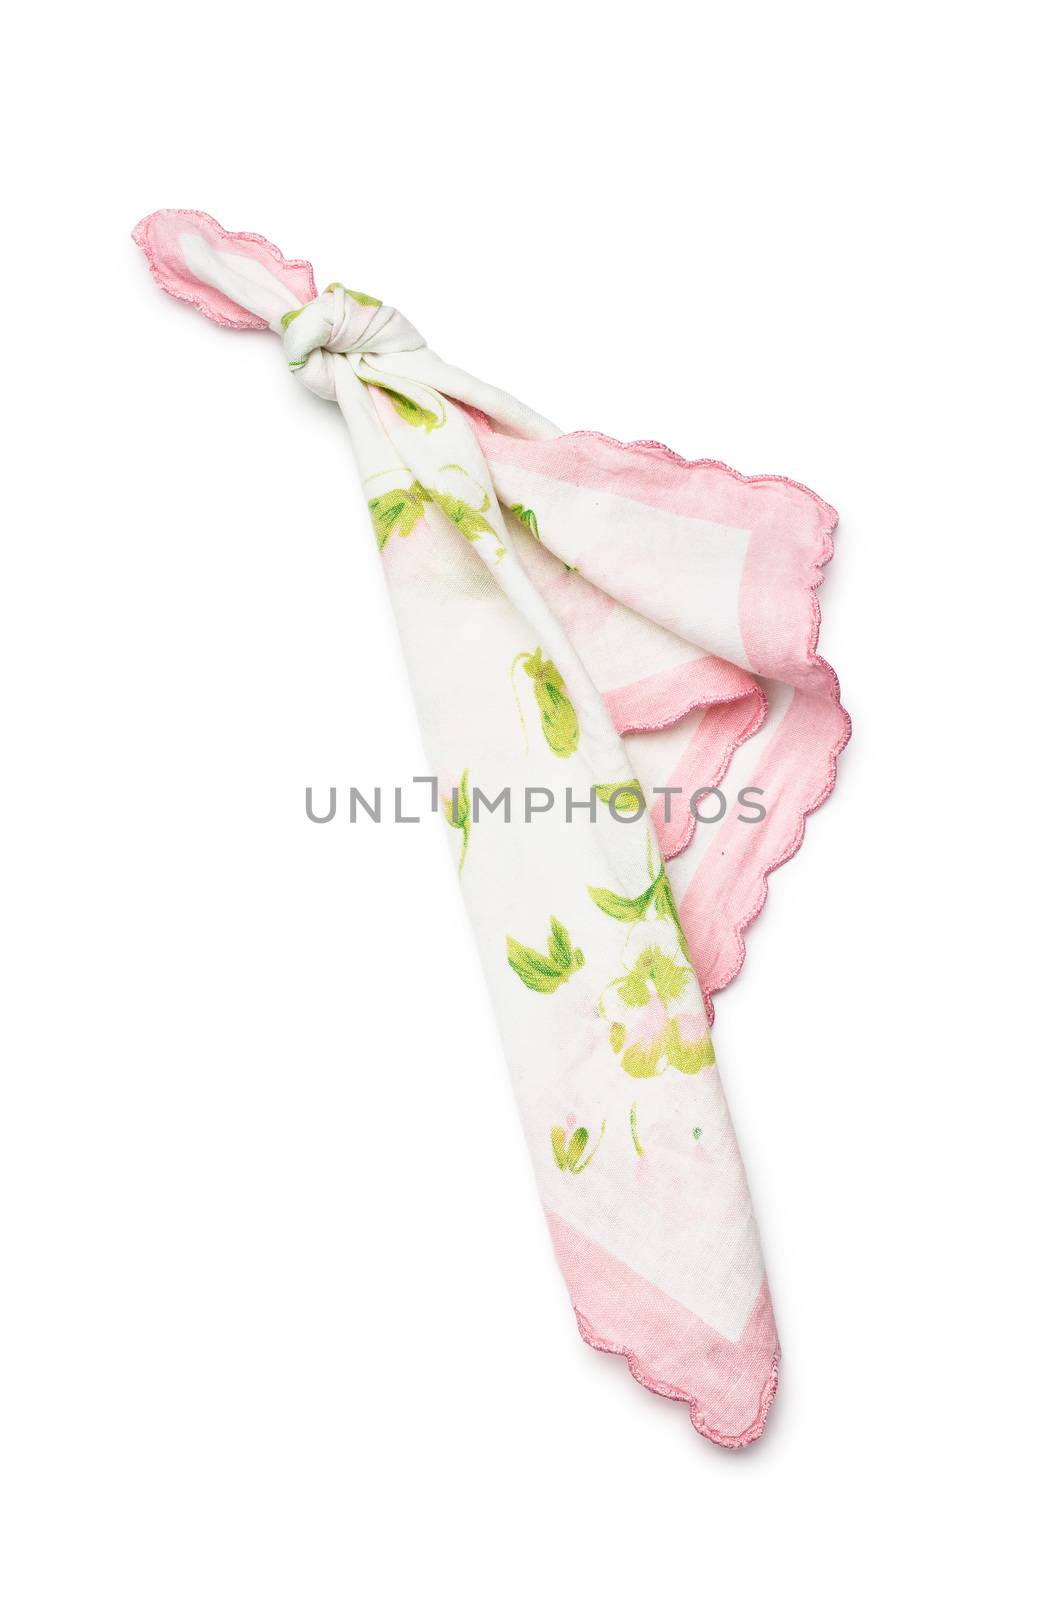 A handkerchief with a knot, to remember something to not forget, isolated on white background